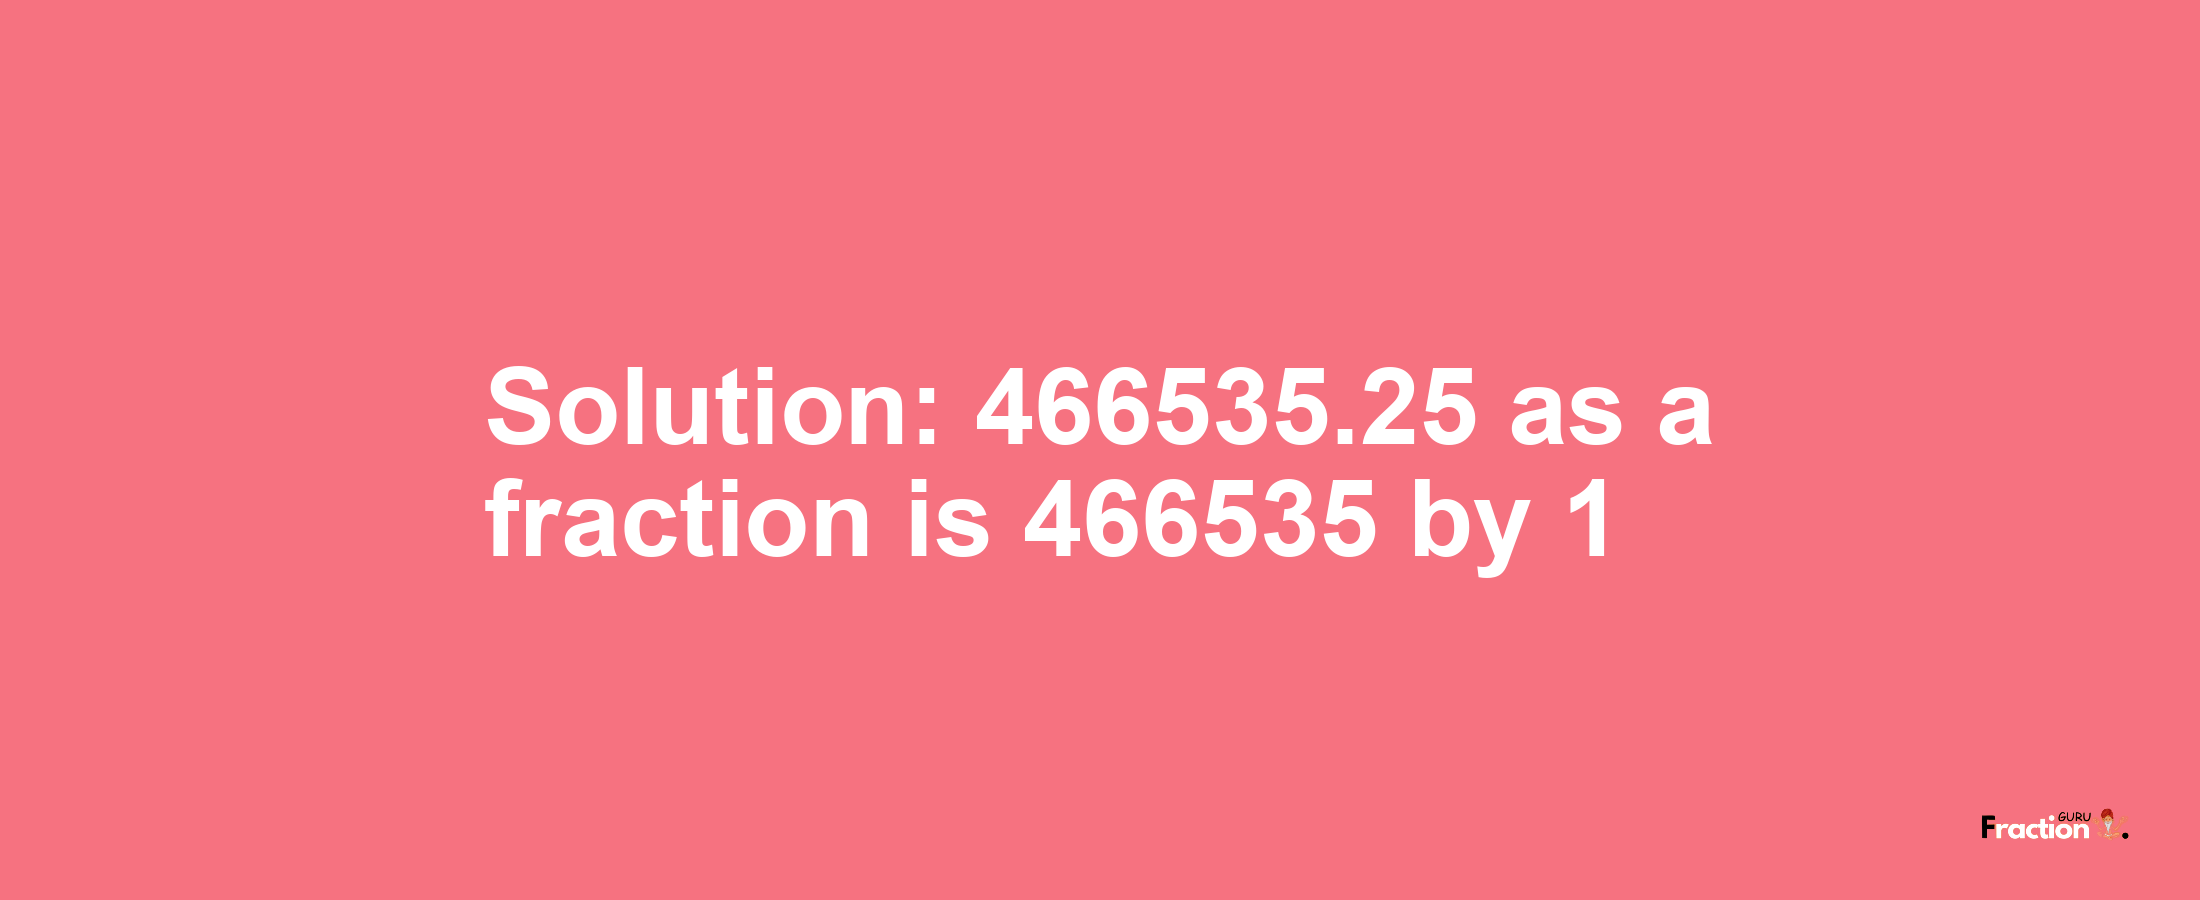 Solution:466535.25 as a fraction is 466535/1